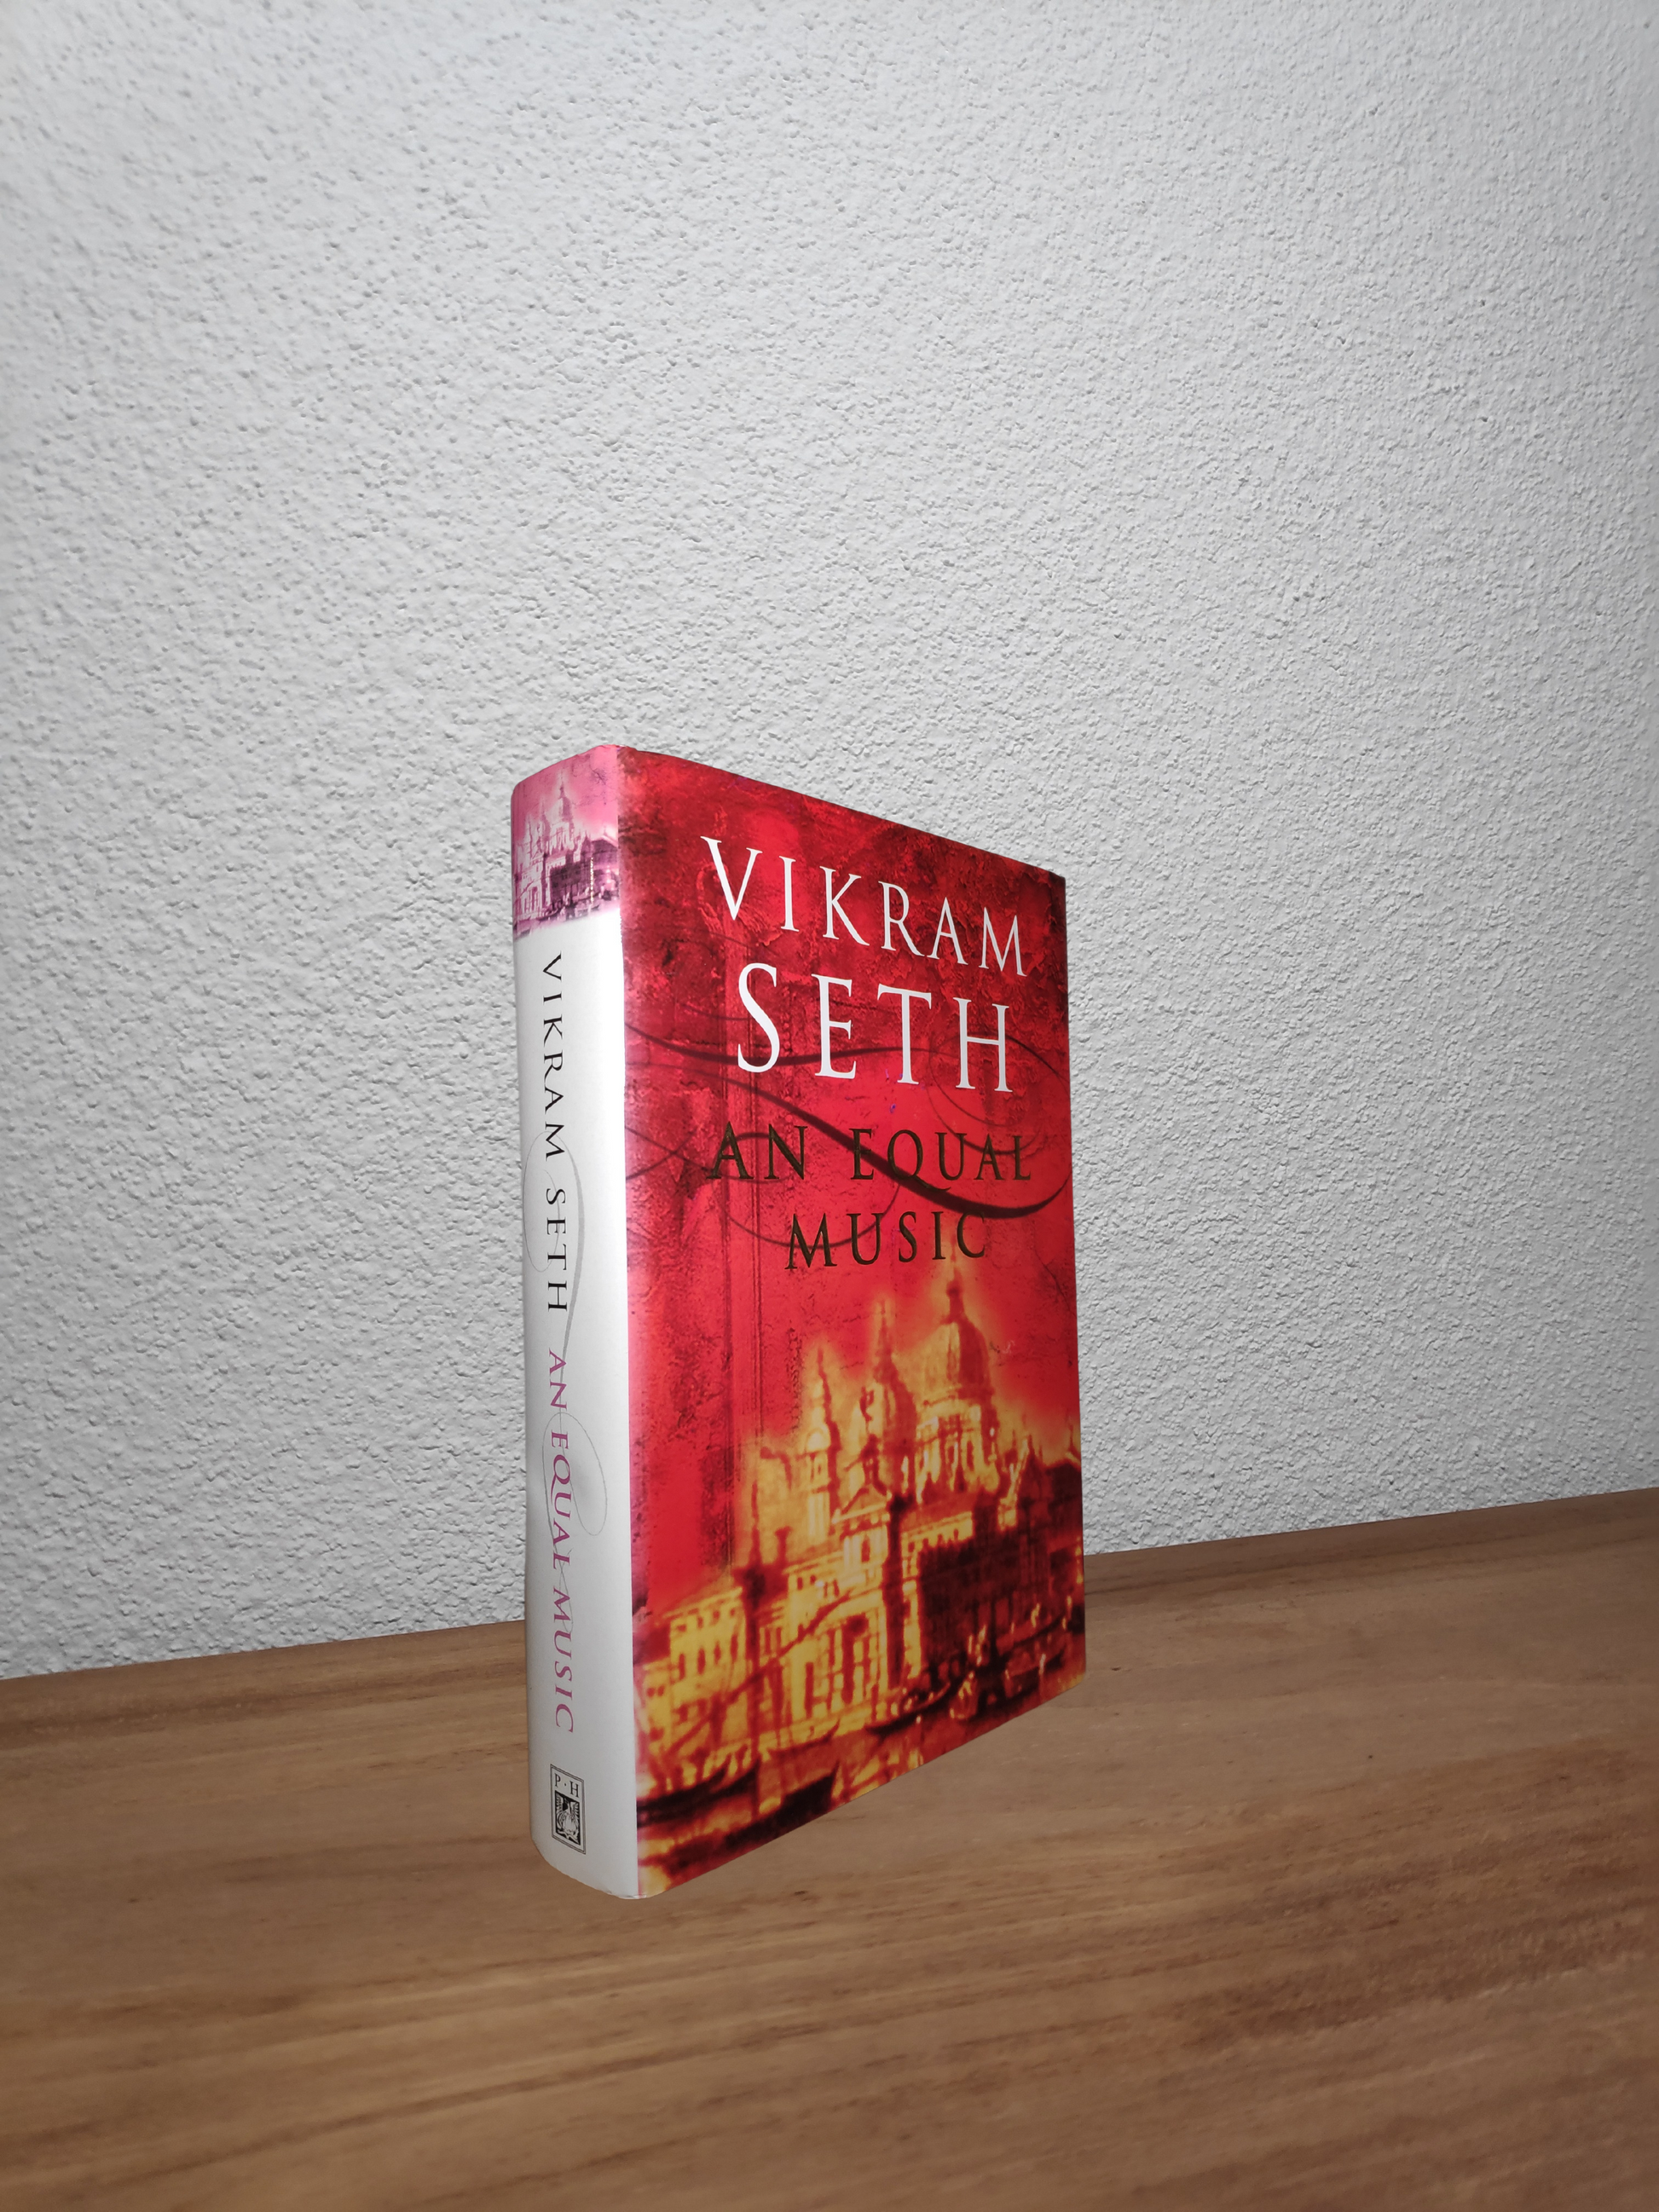 Vikram Seth - An Equal Music  - Second-hand english book to deliver in Zurich & Switzerland